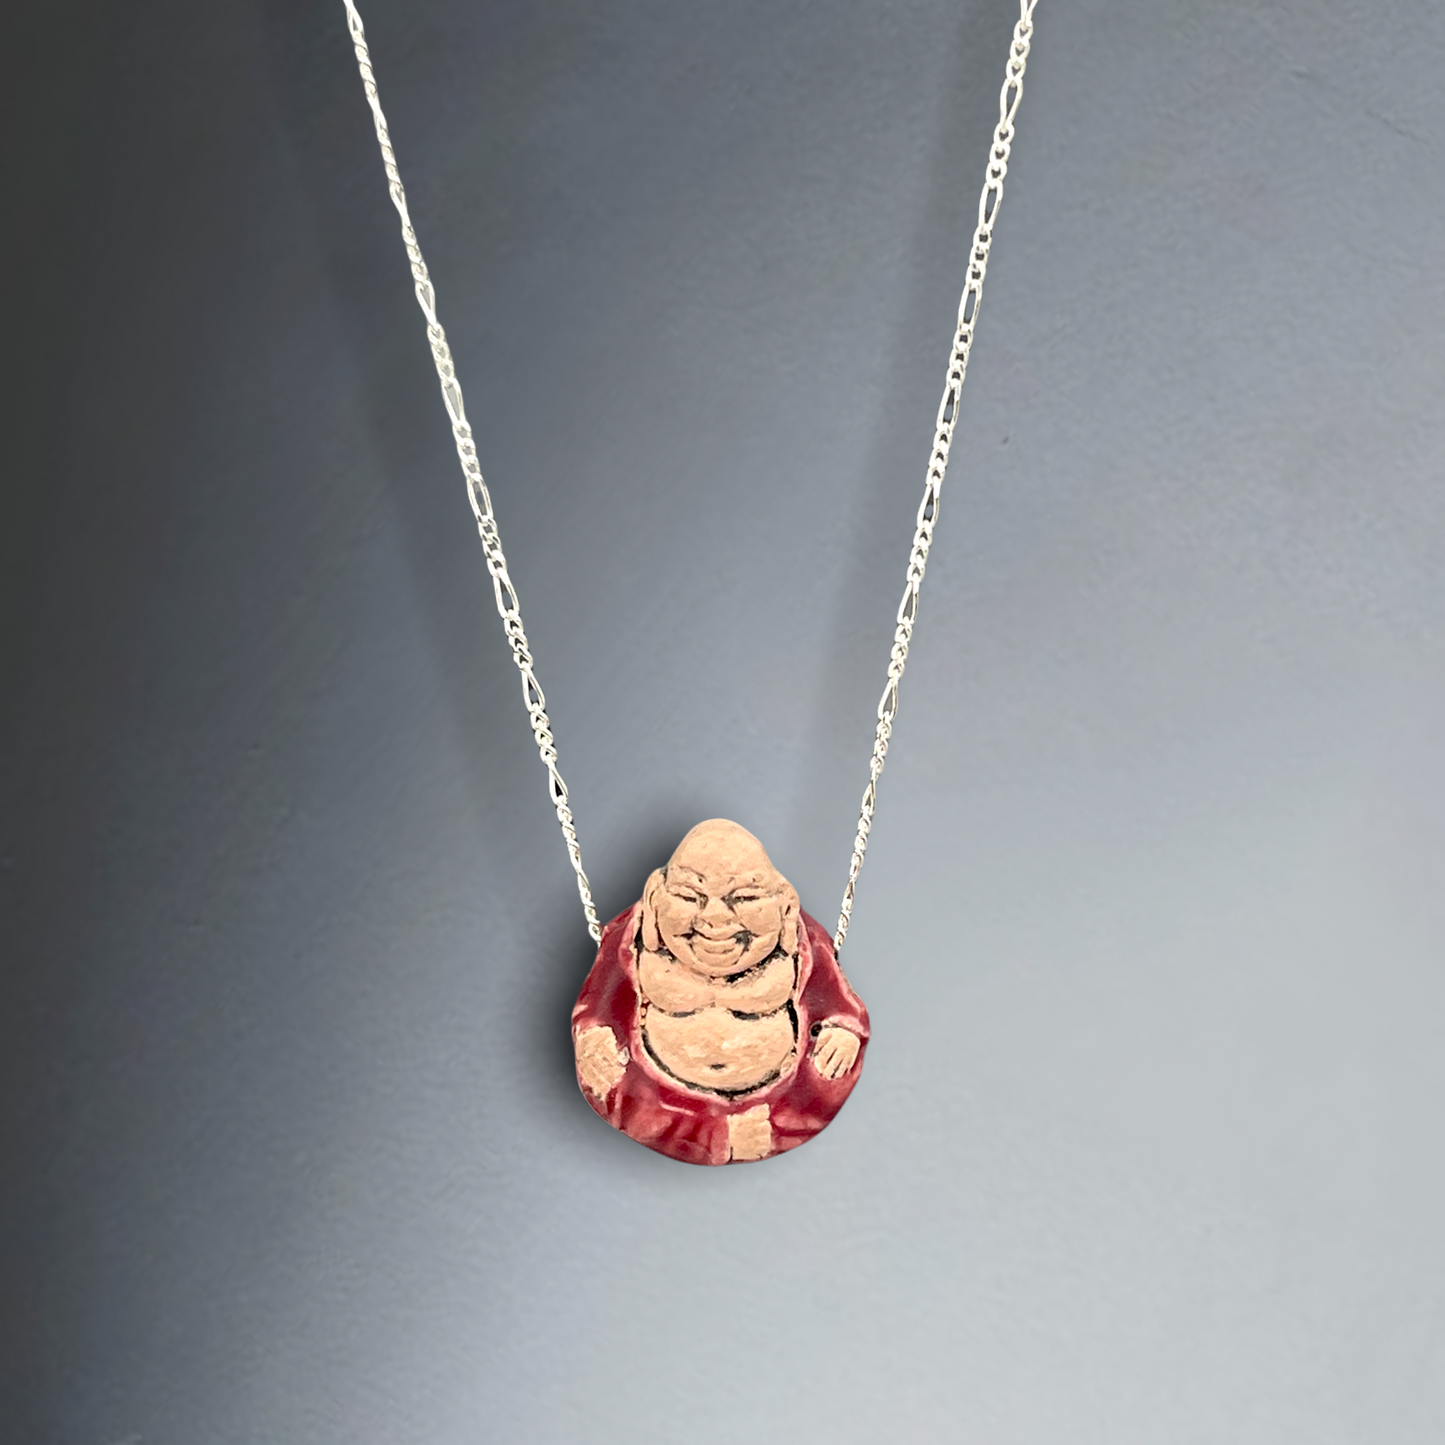 Laughing Buddha made of ceramic on 925 sterling silver chain - K925-73